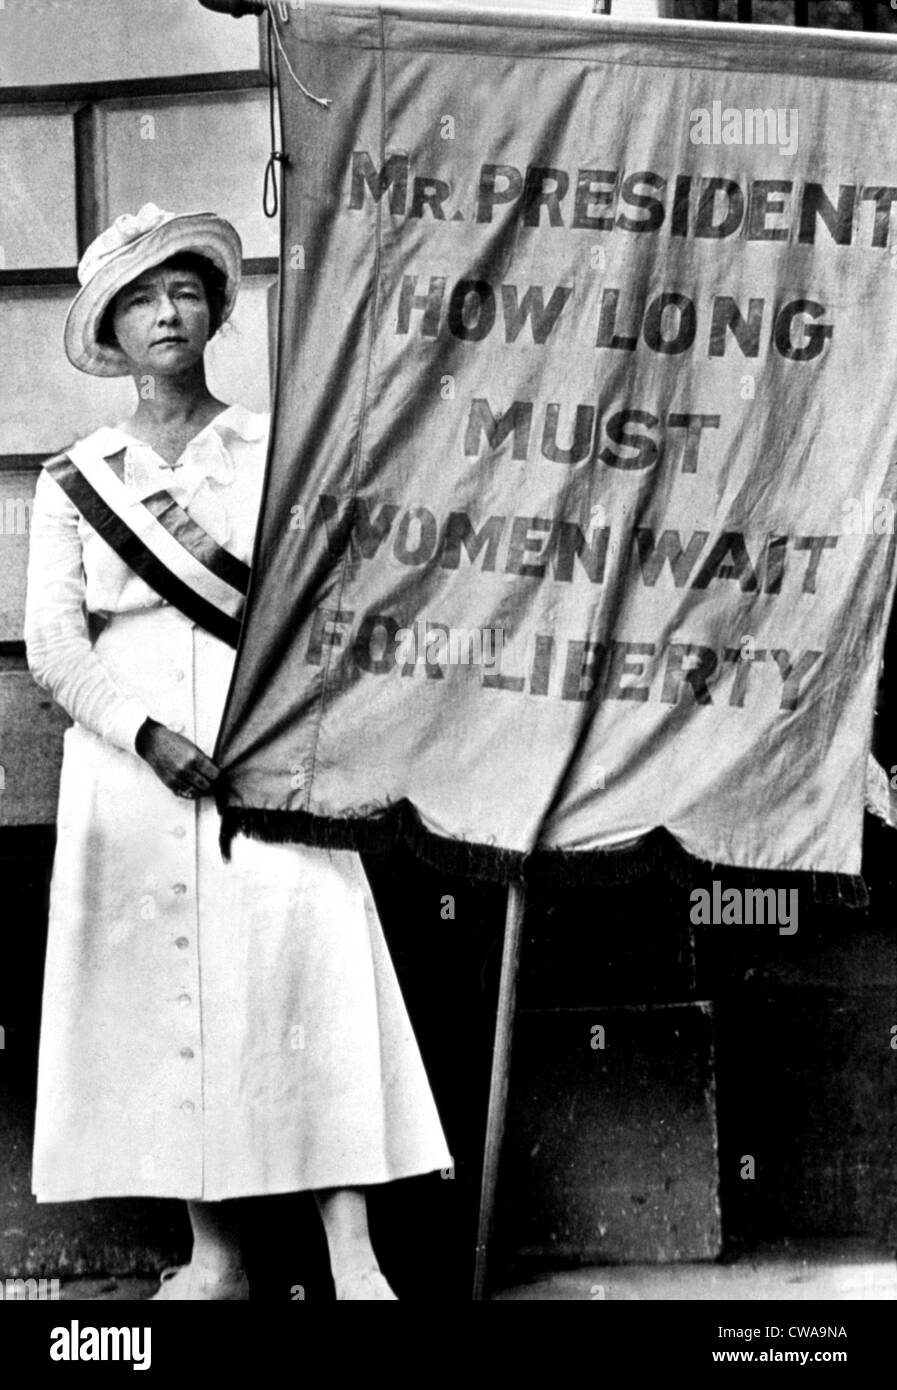 A demonstration for equal rights for women, U.S., 1910s. Courtesy: CSU Archives / Everett Collection Stock Photo